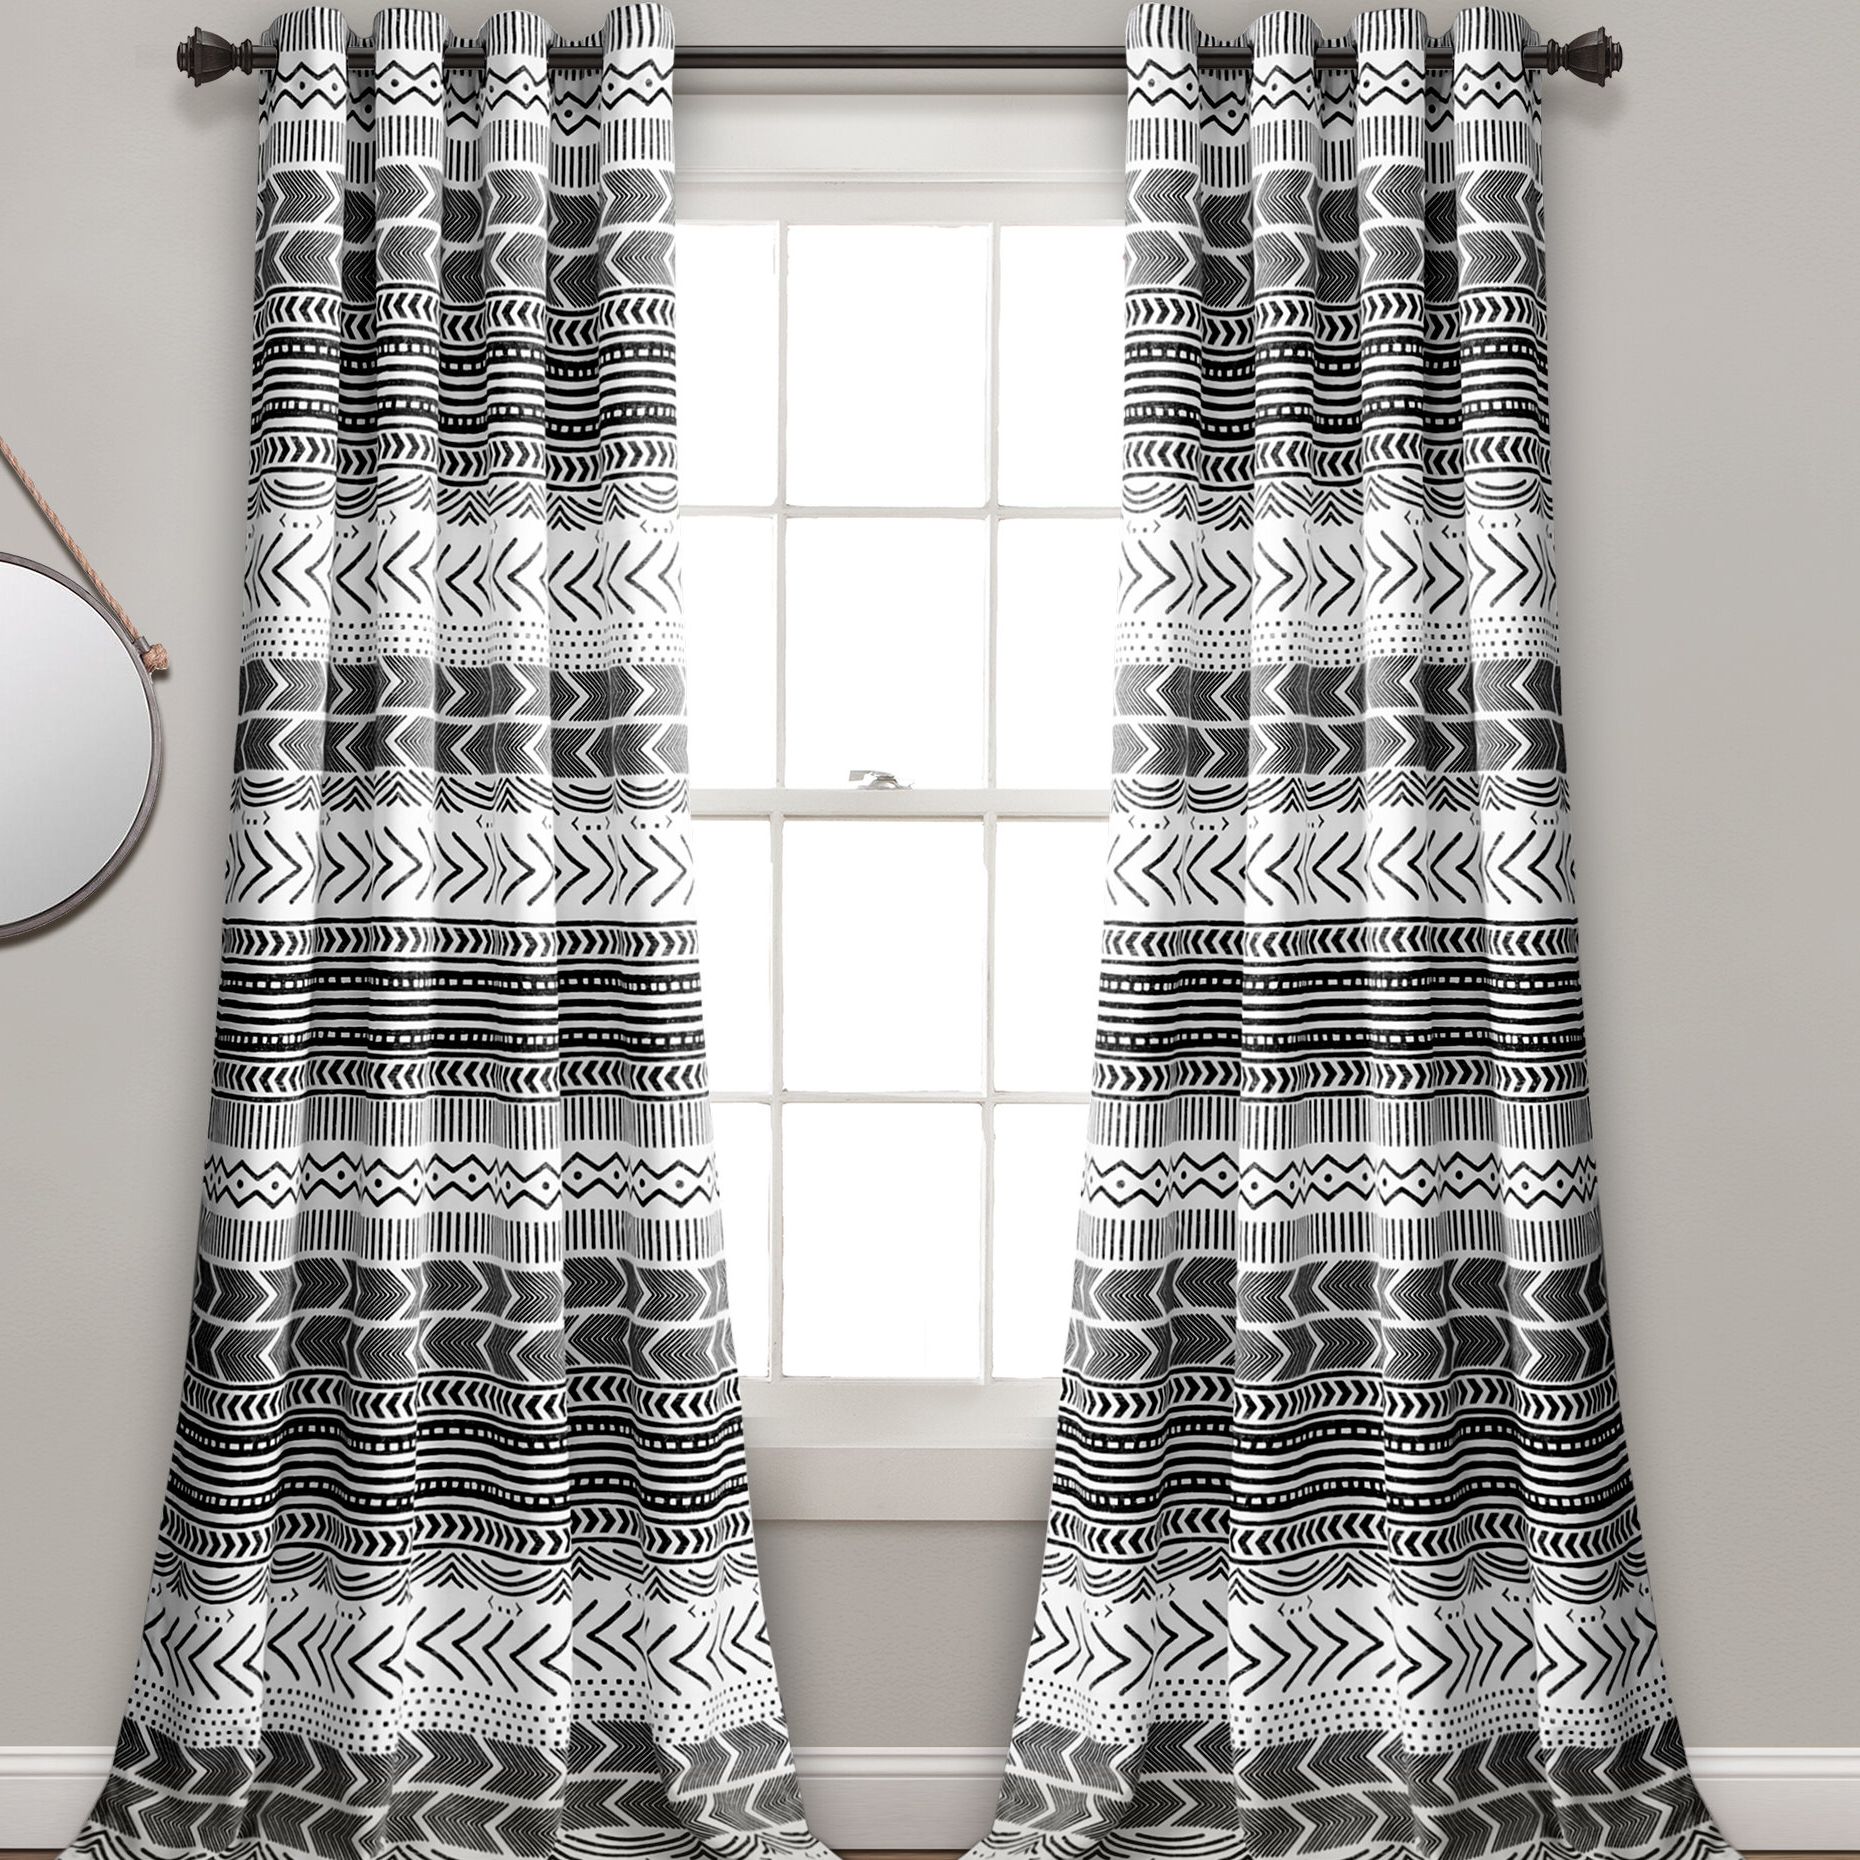 Room Darkening Window Curtain Panel Pairs Throughout Widely Used Tidwell Geometric Room Darkening Curtain Panel Pair (View 9 of 20)